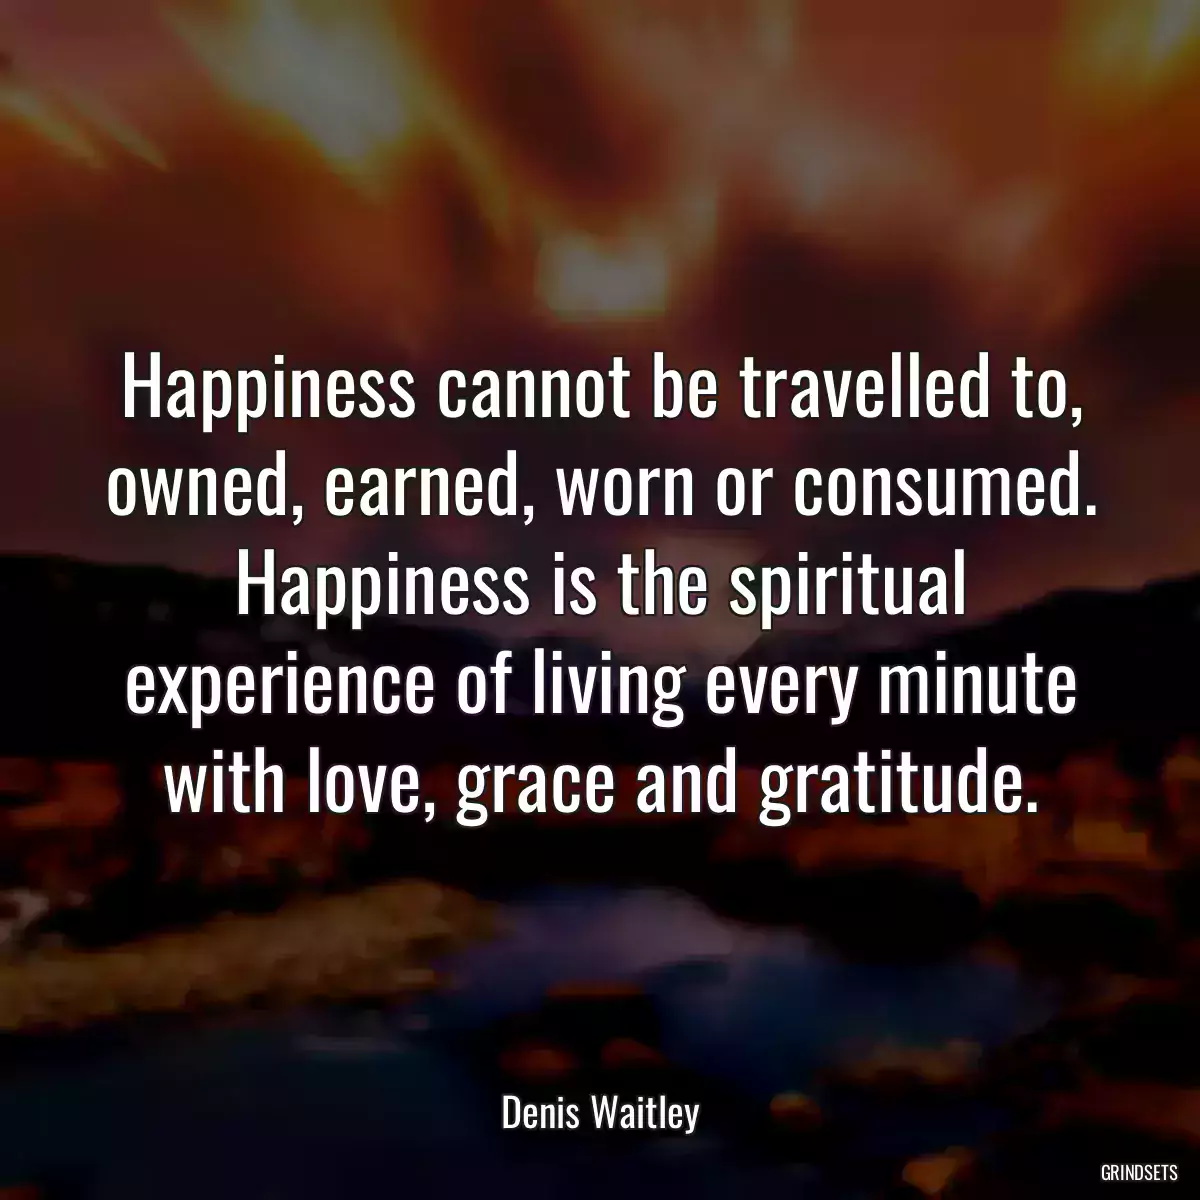 Happiness cannot be travelled to, owned, earned, worn or consumed. Happiness is the spiritual experience of living every minute with love, grace and gratitude.